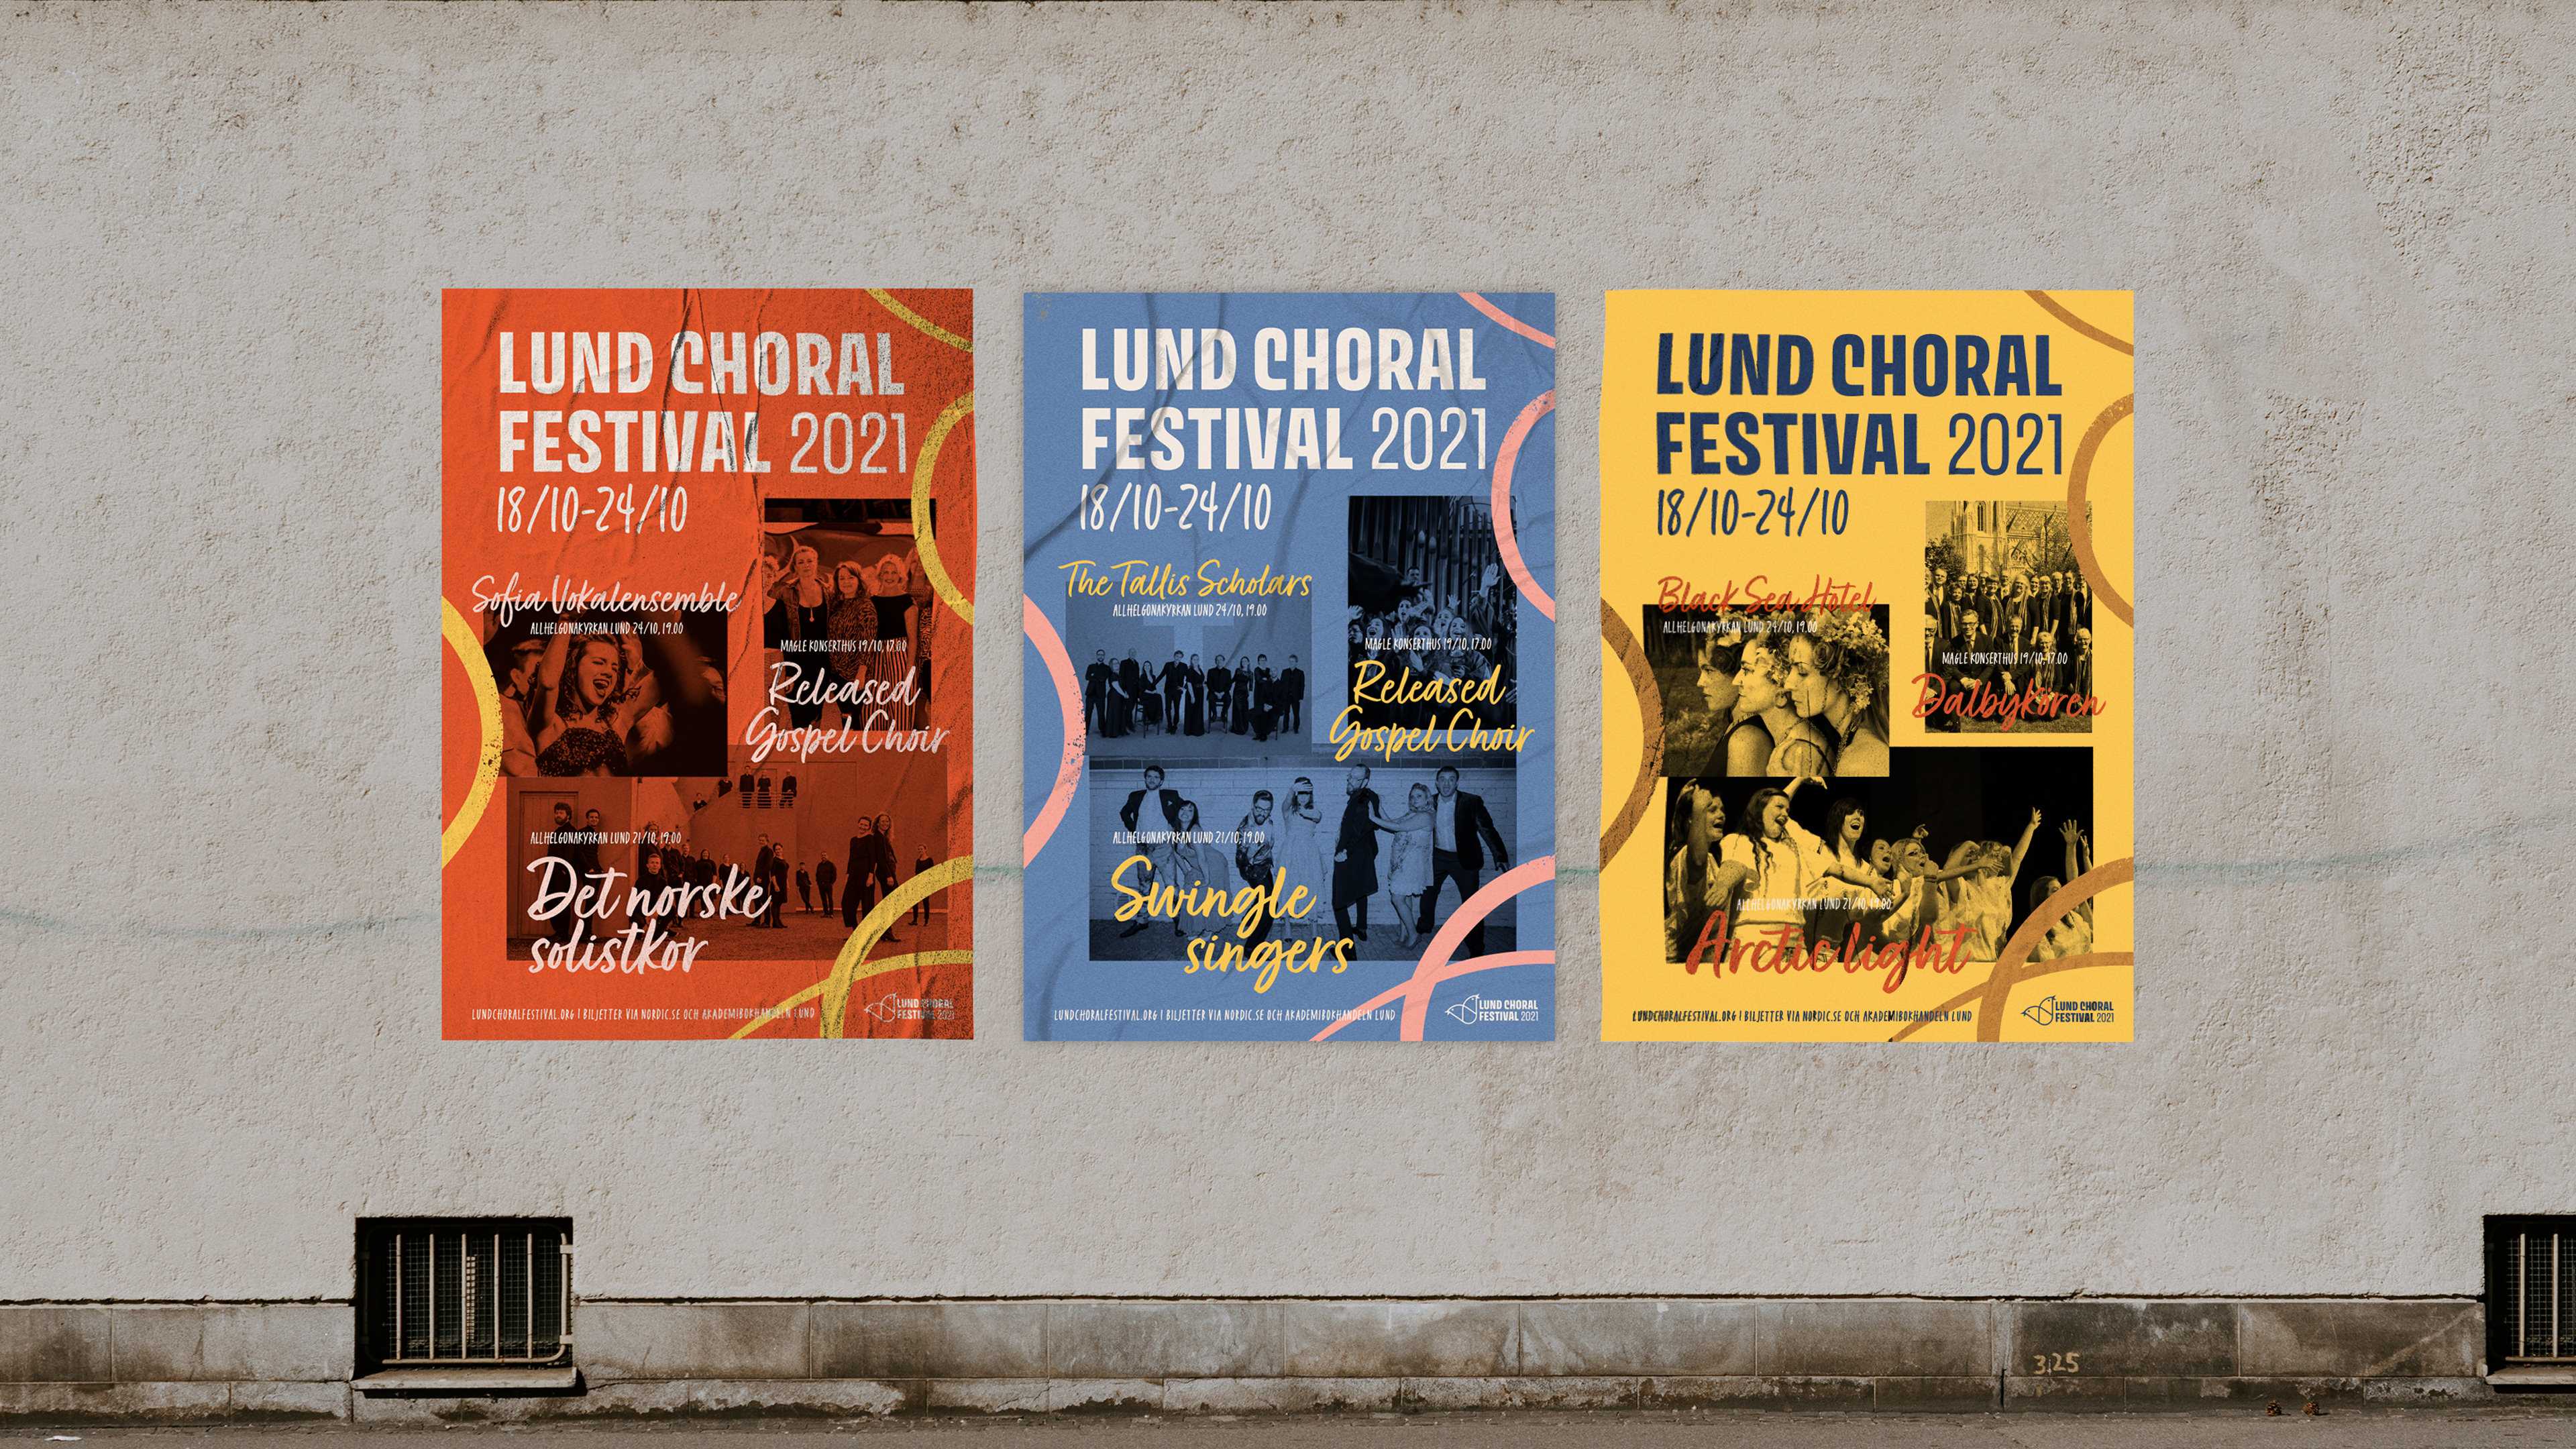 Posters for Lund choral festival designed by Studio Poi